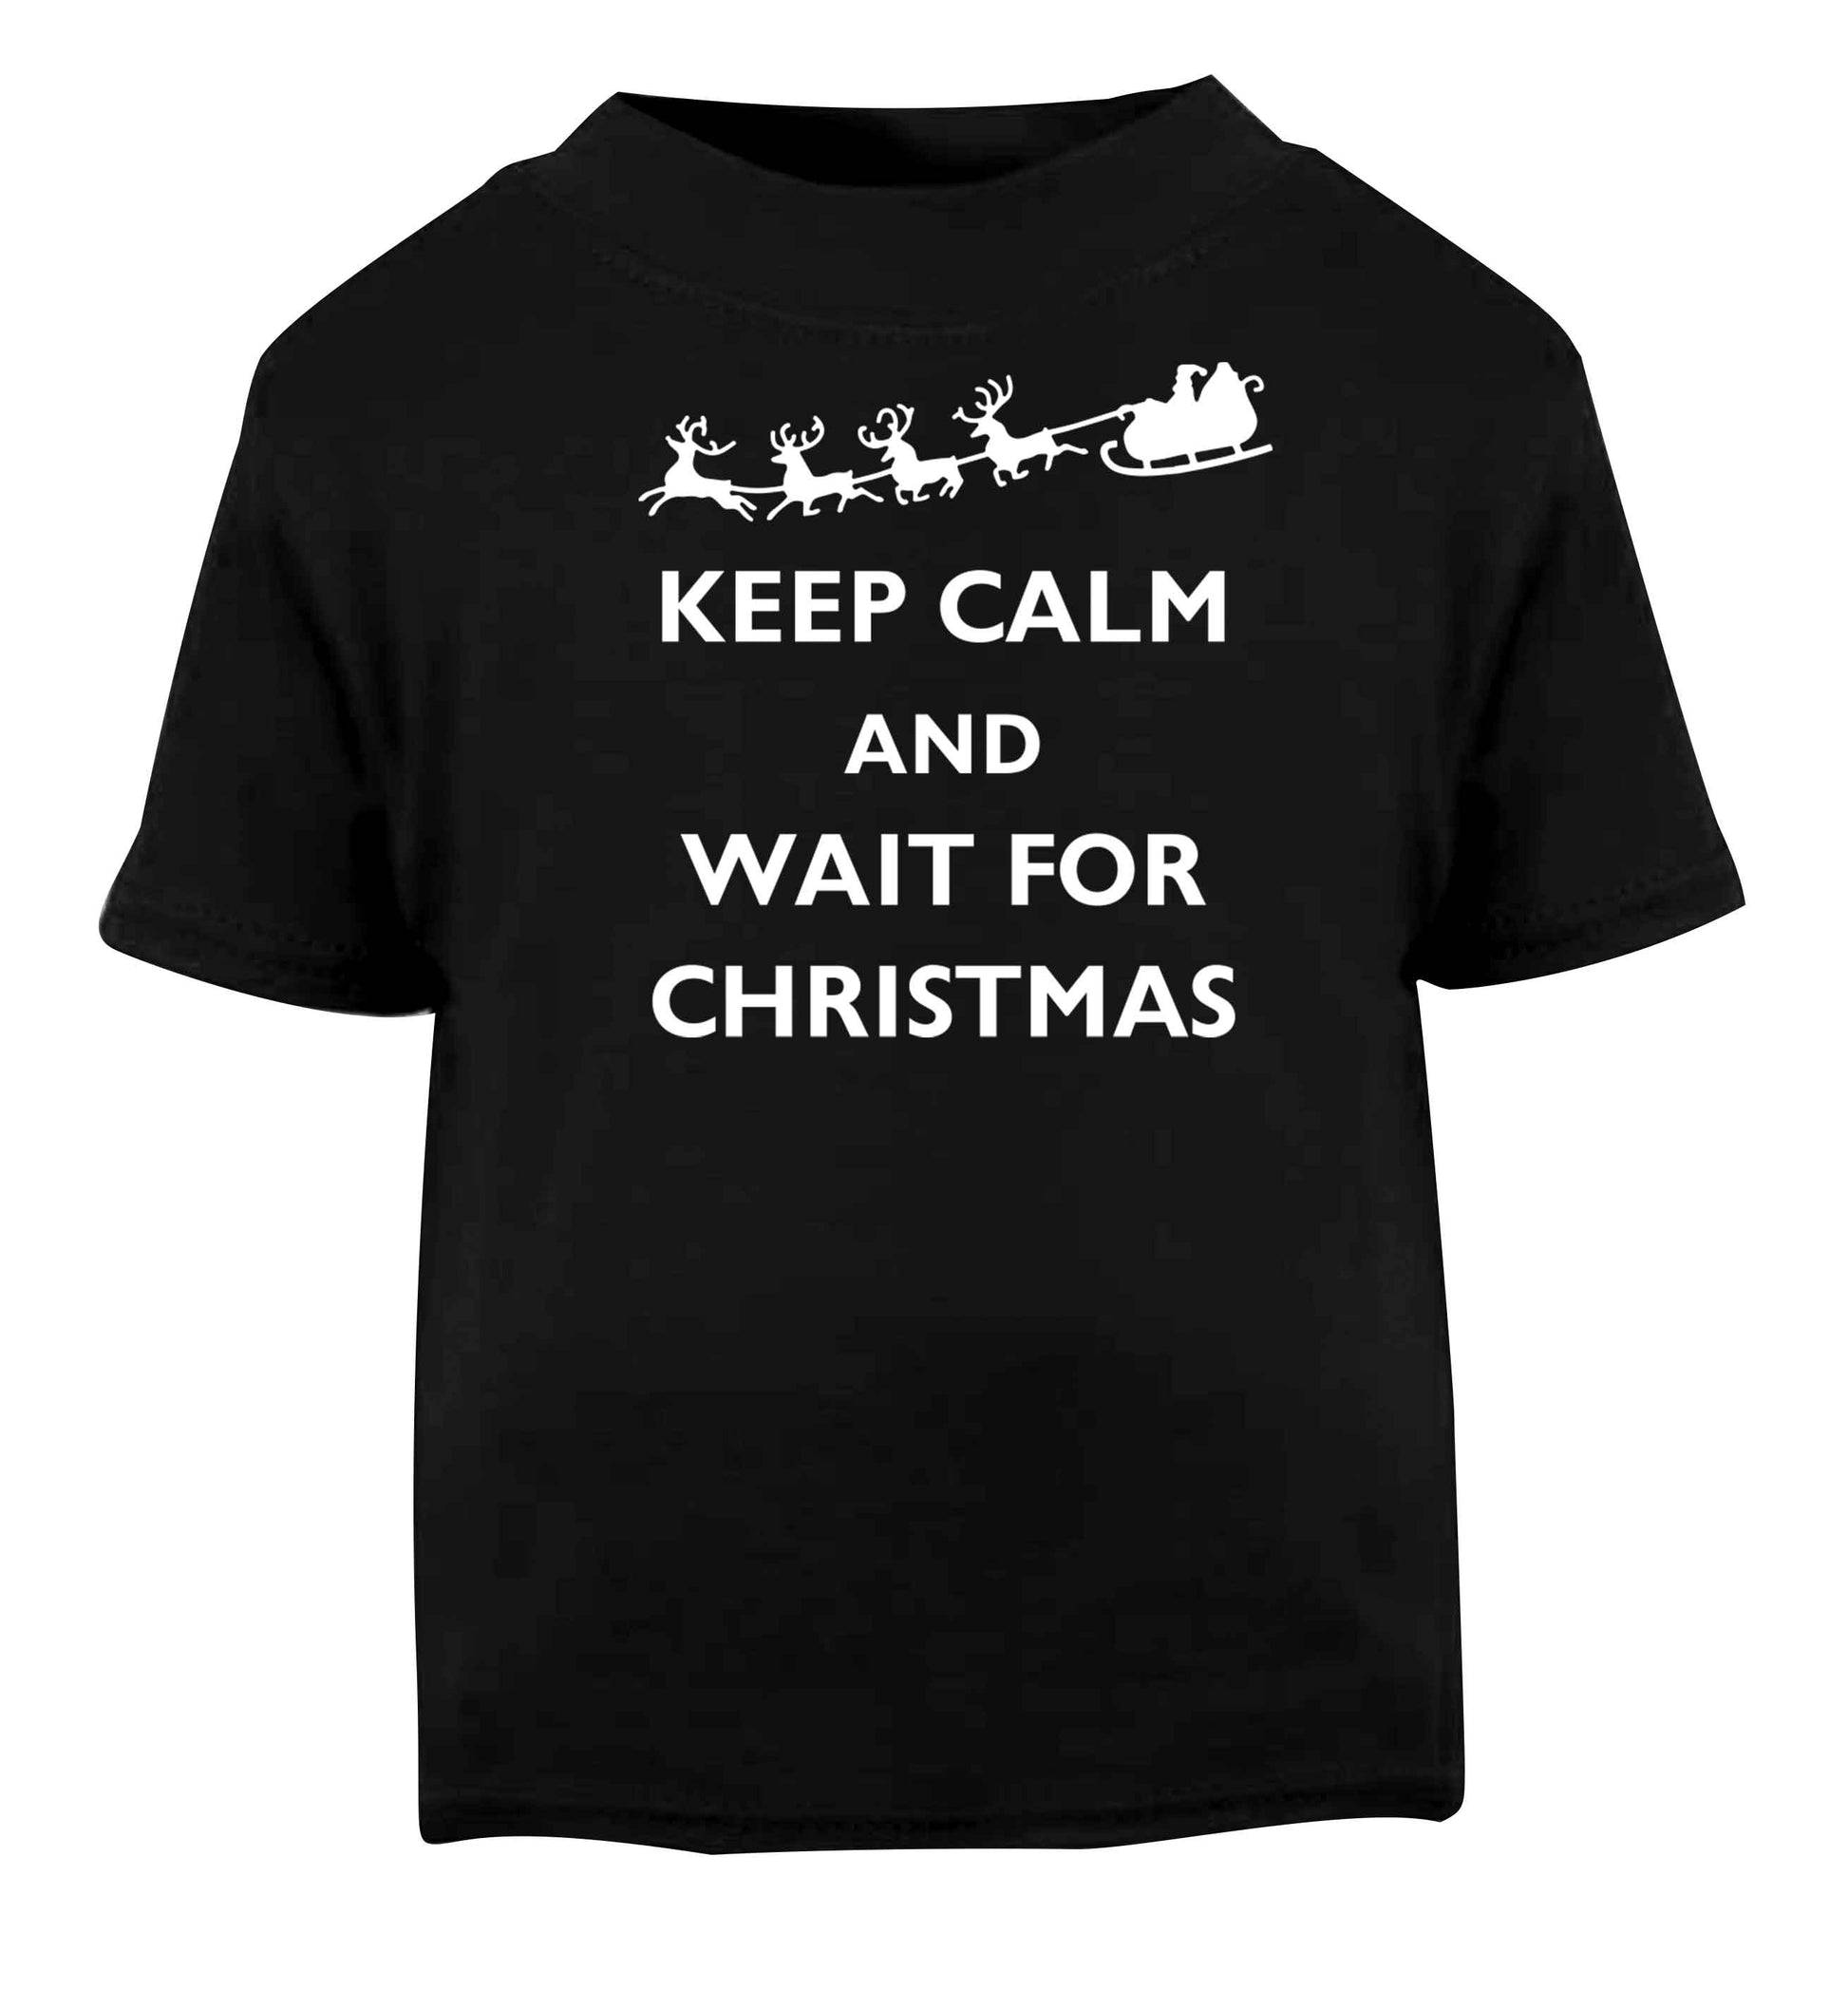 Keep calm and wait for Christmas Black baby toddler Tshirt 2 years